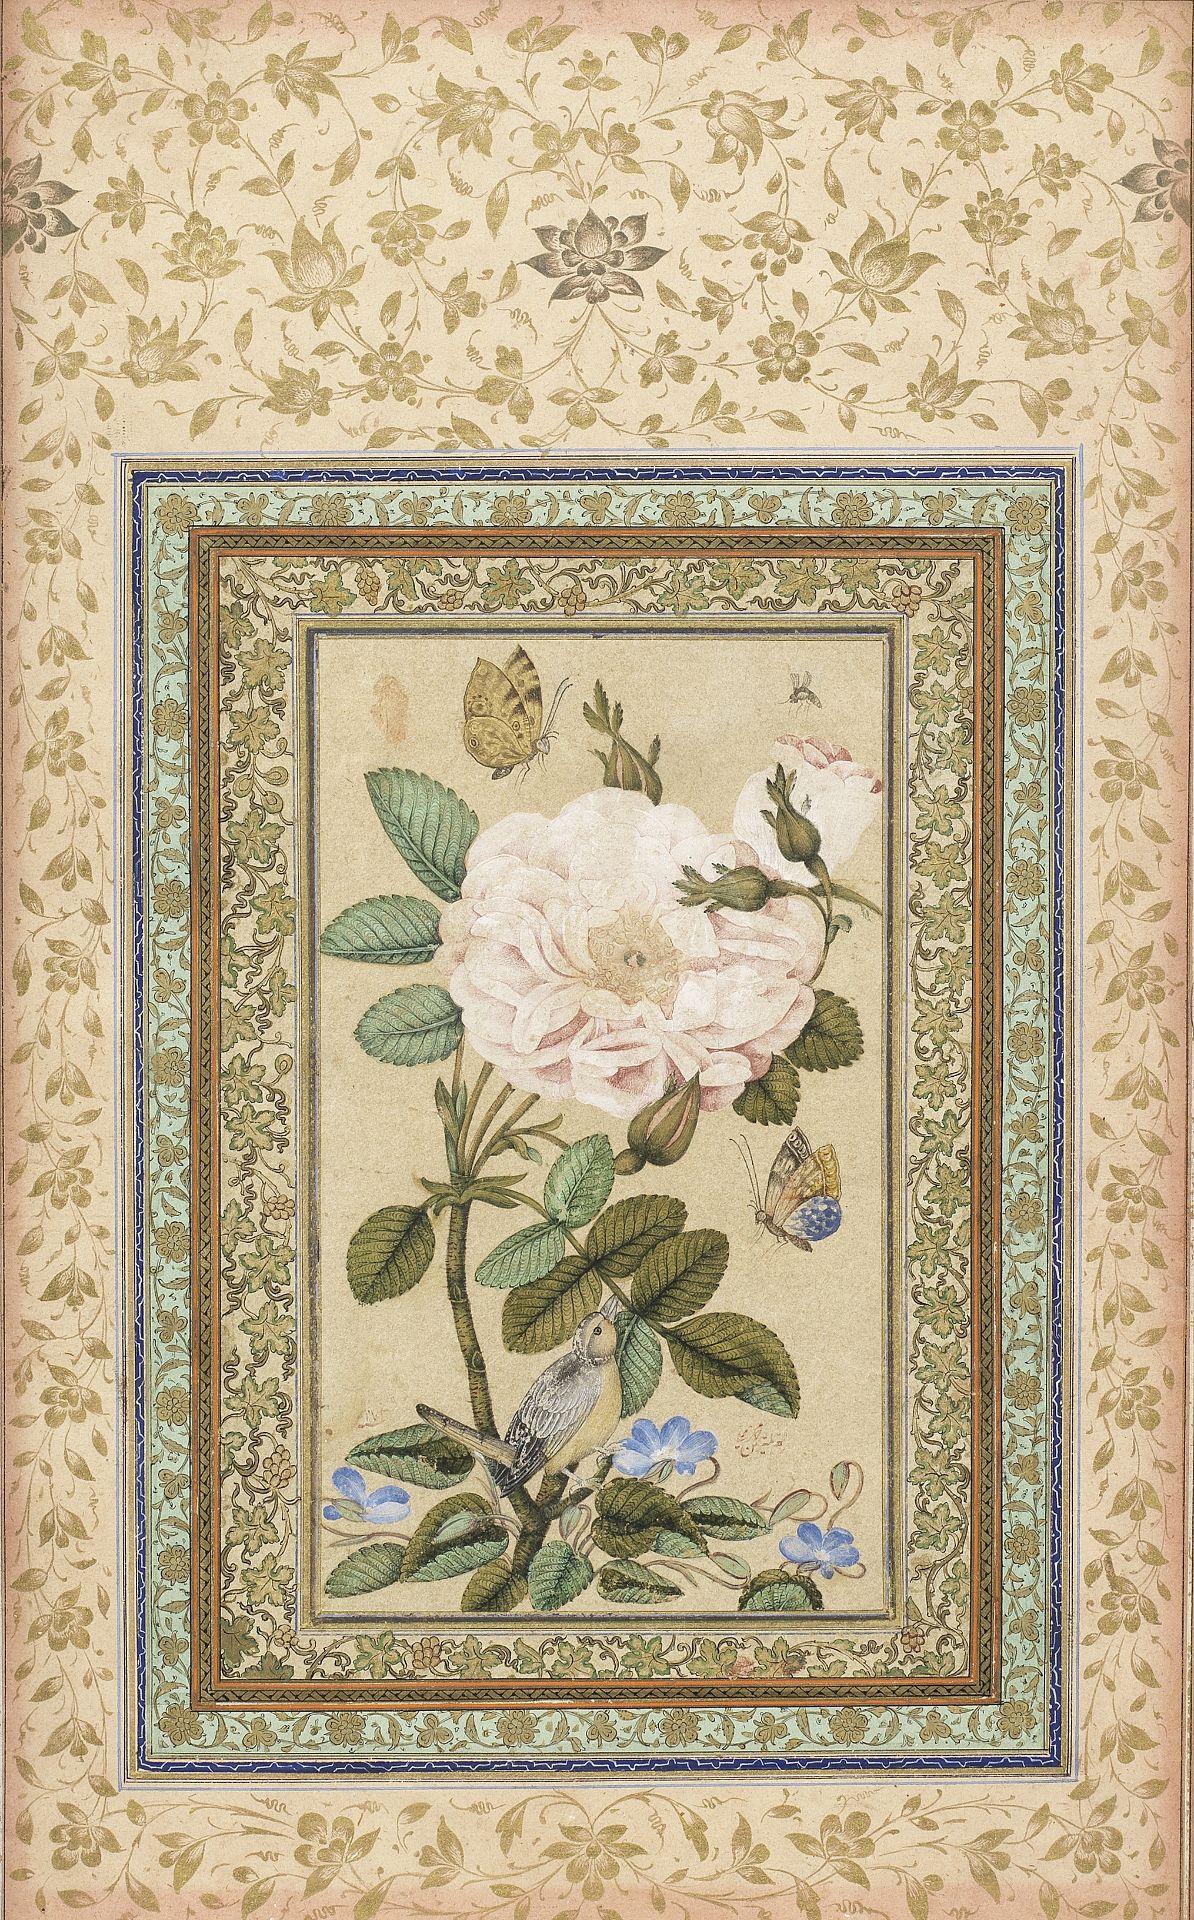 A bird perched in a rose bush, with butterflies round about (Gul-o Bulbul), signed by Muhammad 'A...